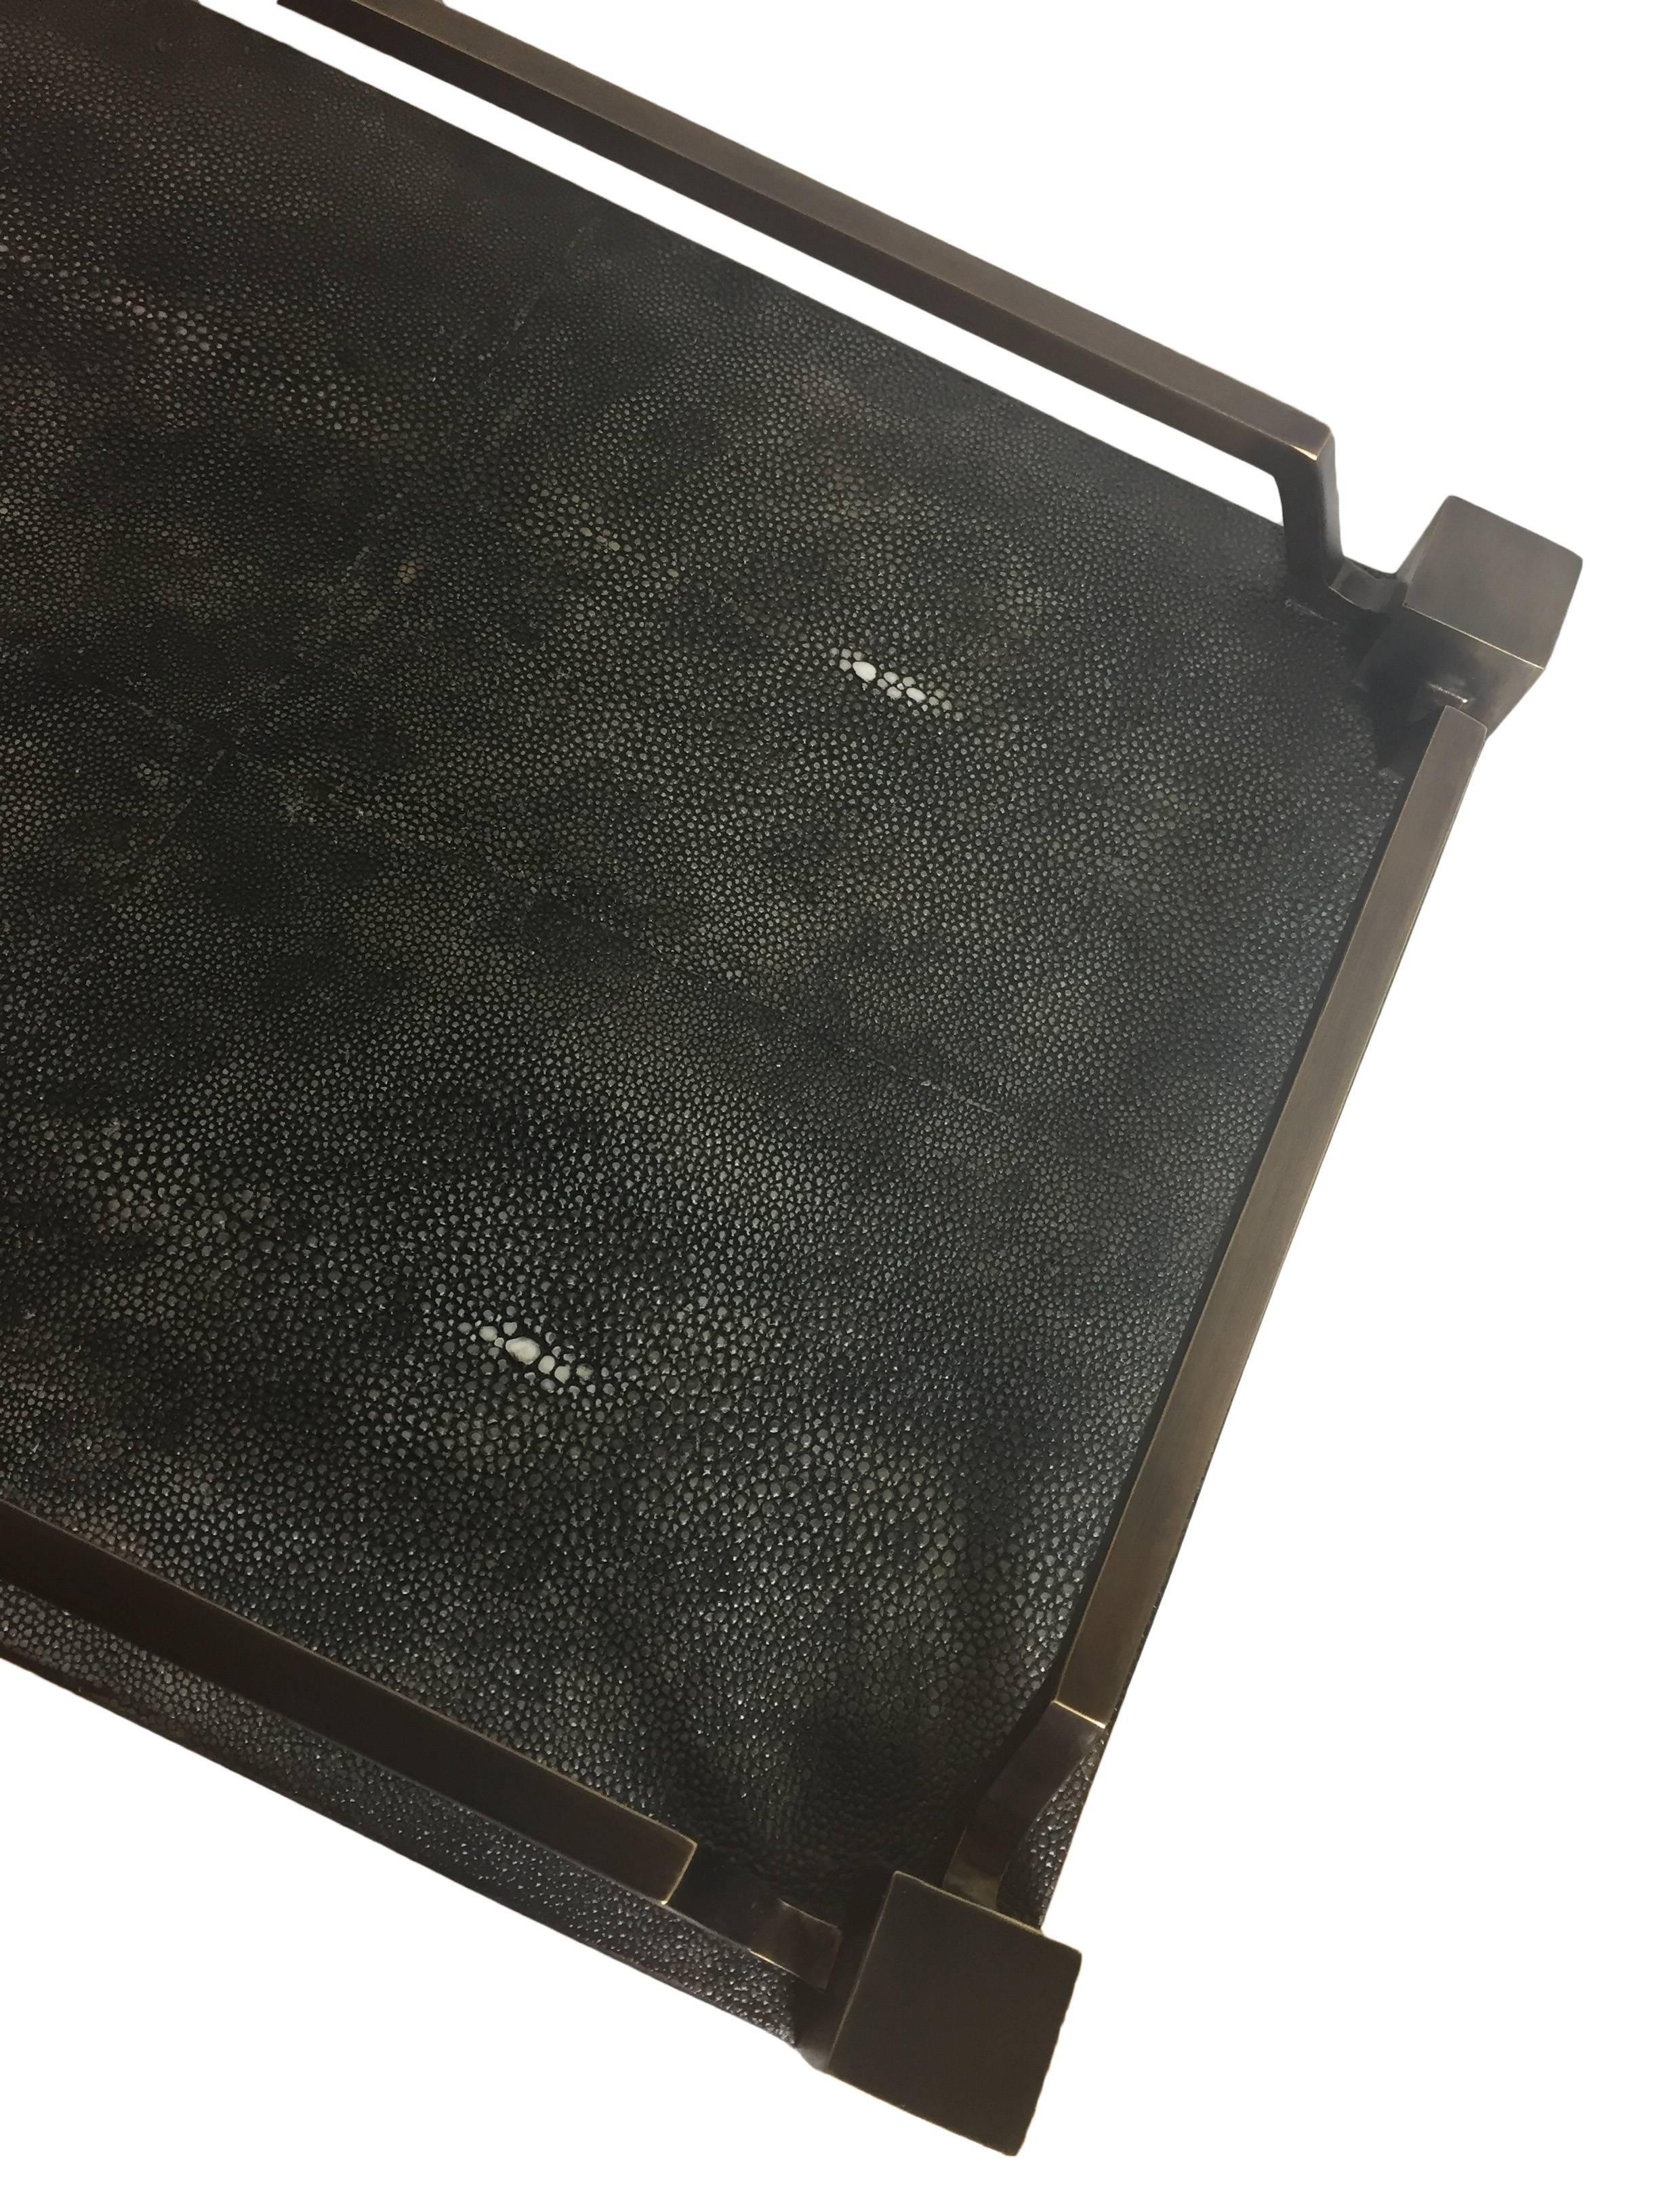 R & Y Augousti new shagreen service tray come in a dark shade with brass inlay. This gem was handmade over a period three months.